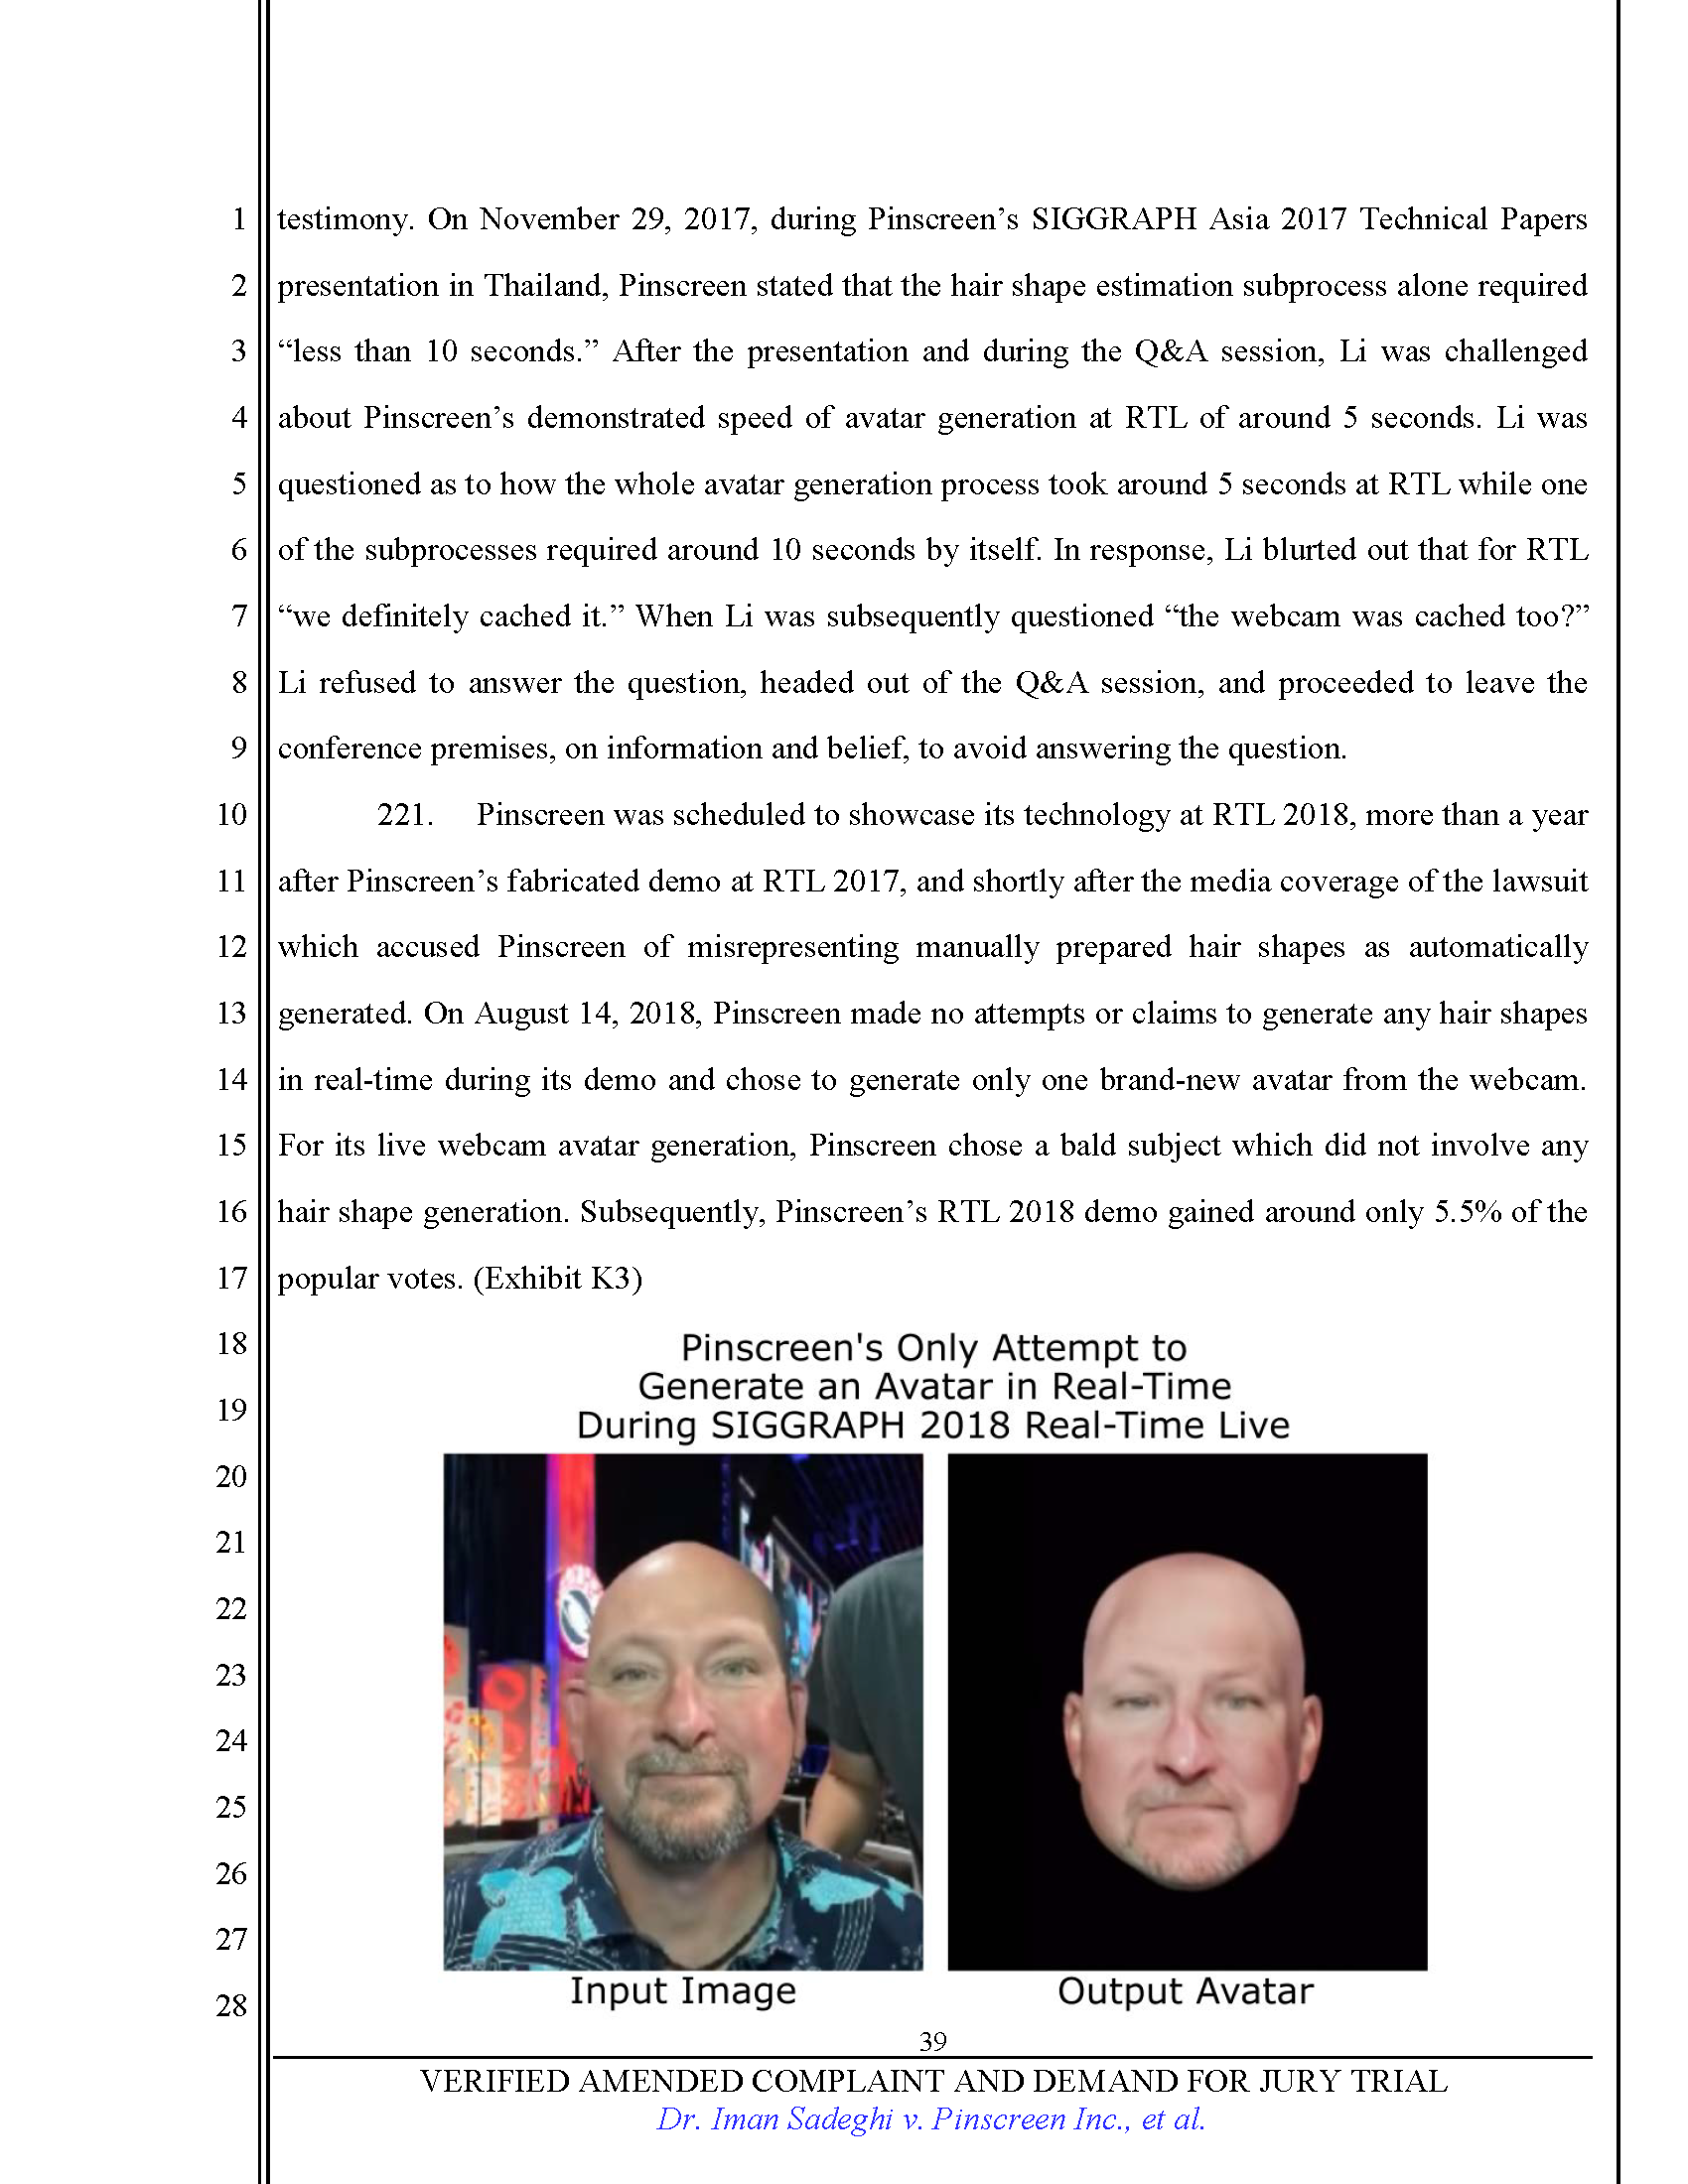 First Amended Complaint (FAC) Page 39